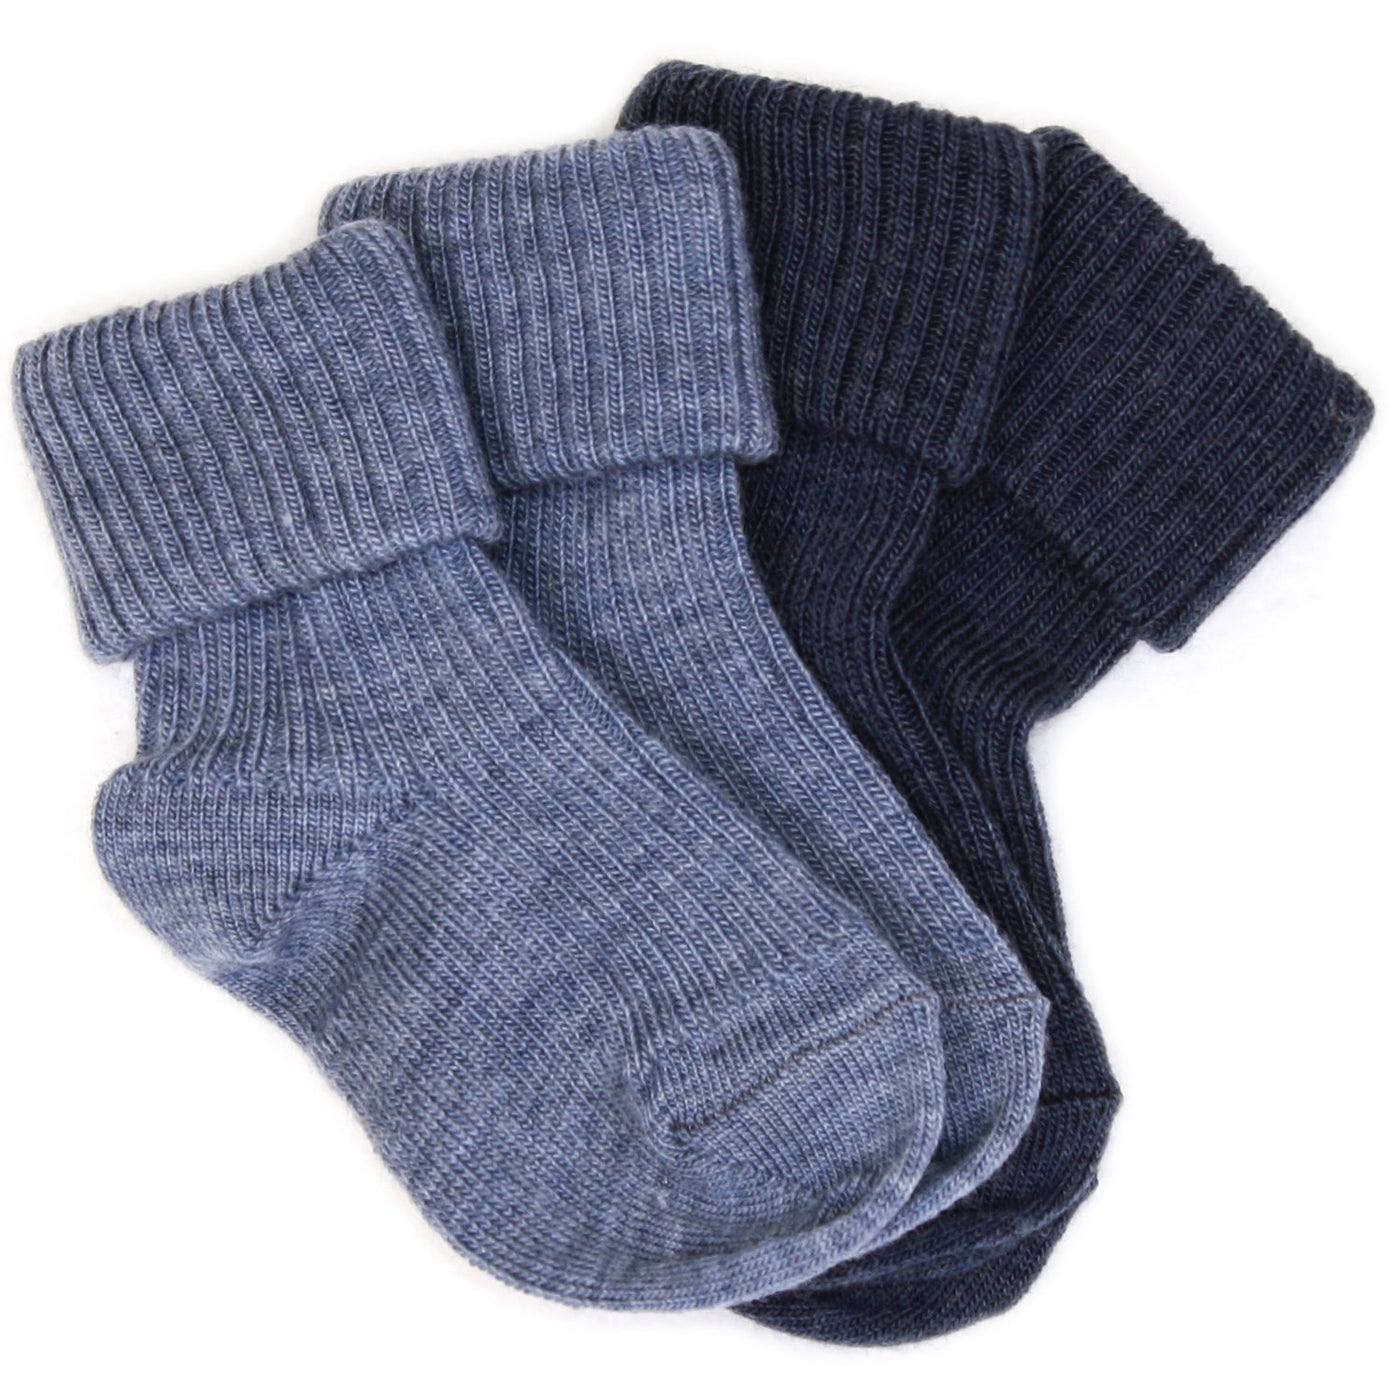 Imperfect Wool Socks, Baby and Toddler, Blue